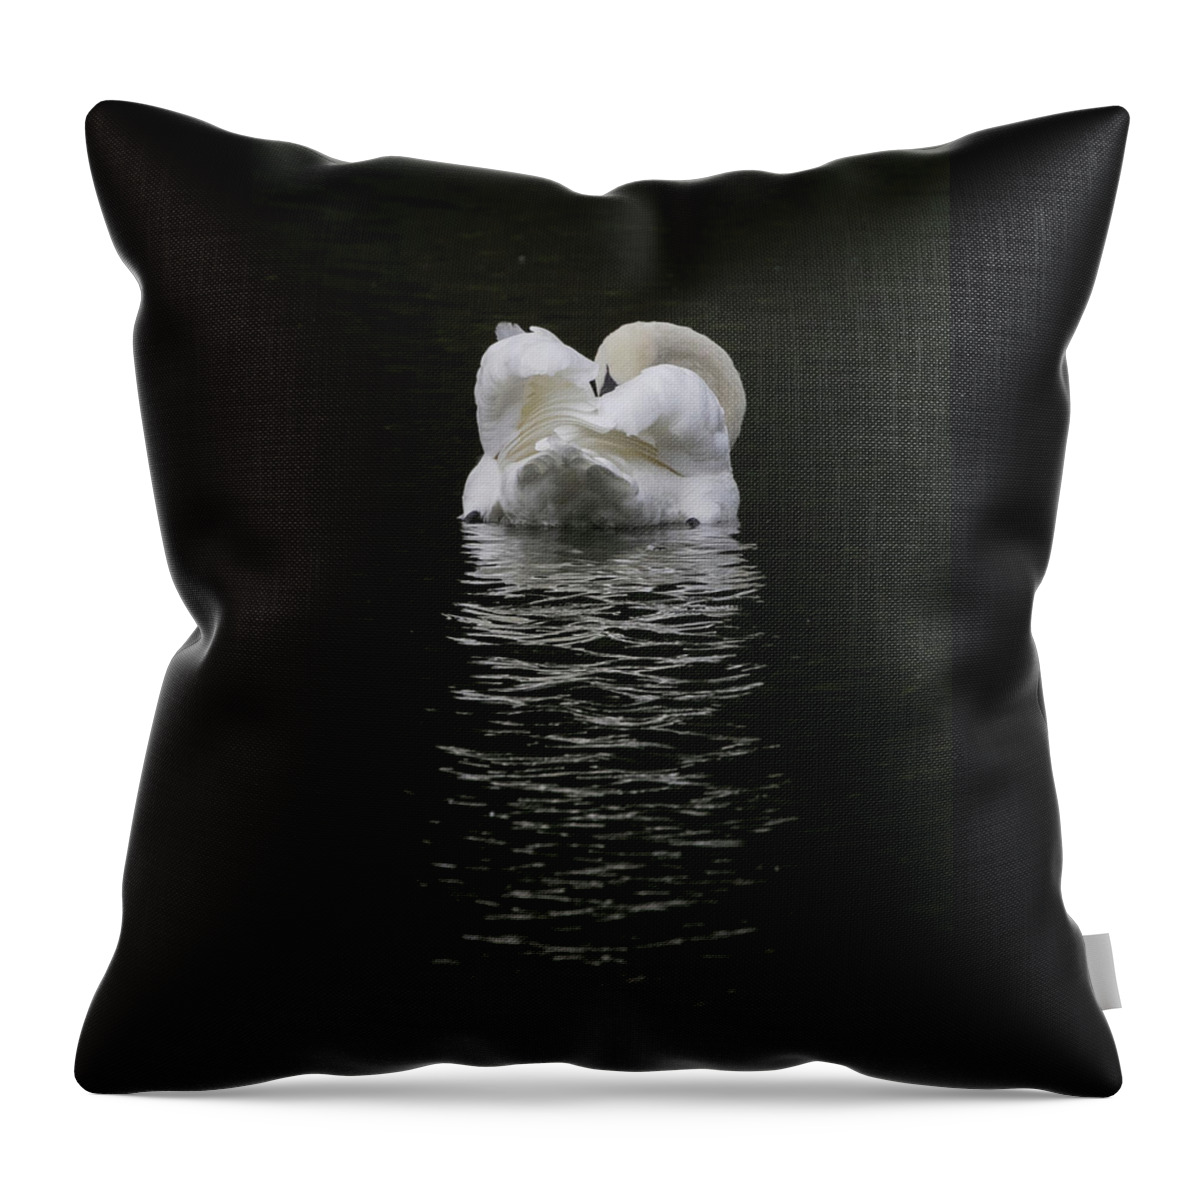 Flyladyphotographybywendycooper Throw Pillow featuring the photograph Mute Swan by Wendy Cooper